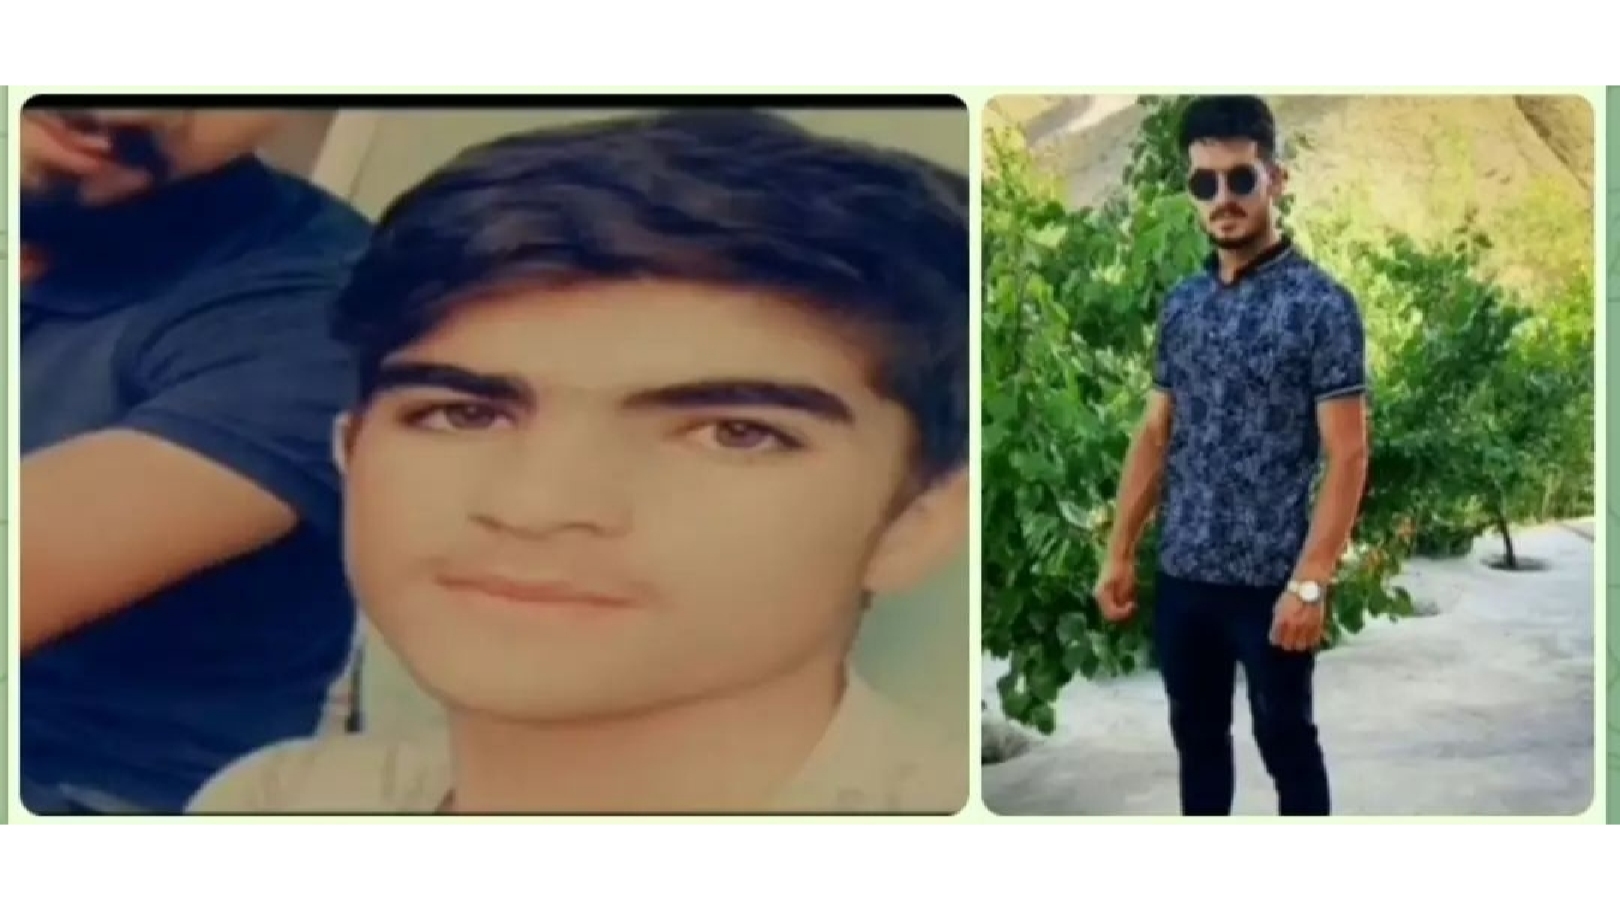 Two Kurdish citizens have been killed by Turkish borders guards.